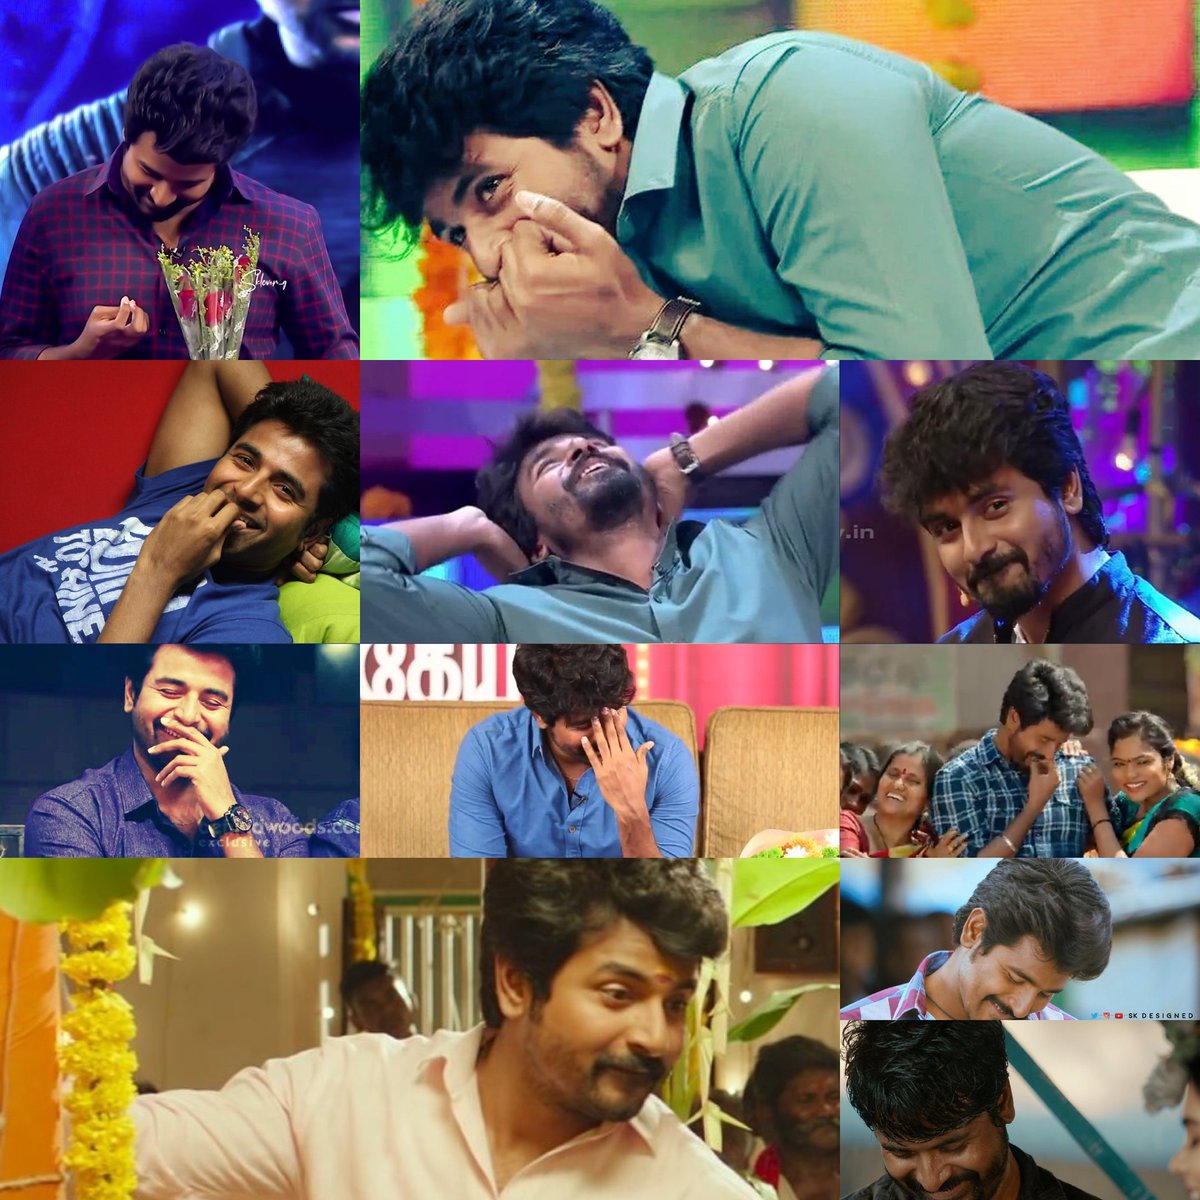   #BlushySK His blush is unlimited I thinkExtra cuteness overloaded of thalaivan & it's really overflowing 